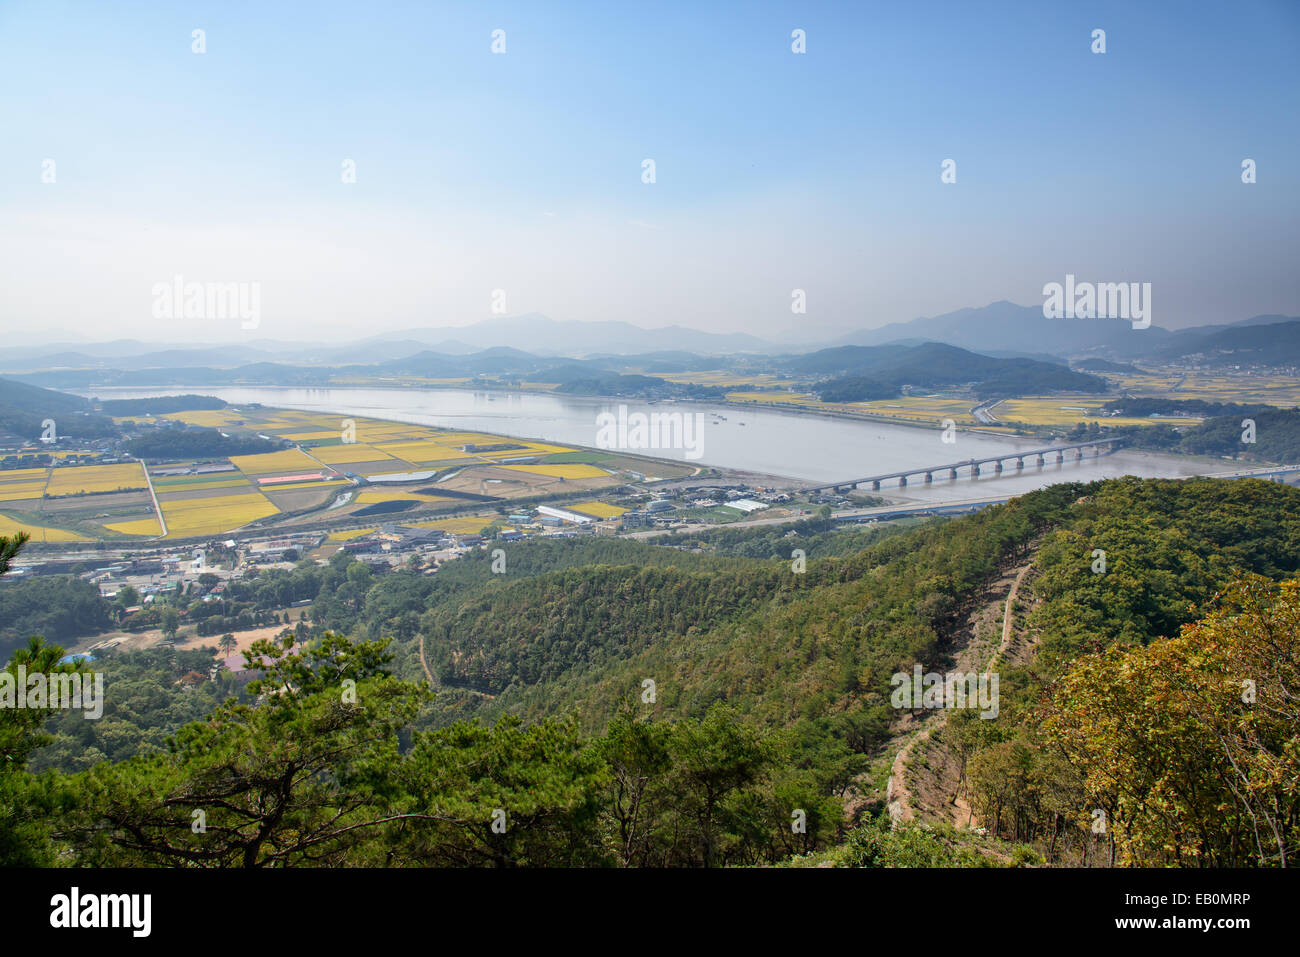 View of Ganghwa island and Gimpo plain from Munsu Mountain fortress in Korea Stock Photo